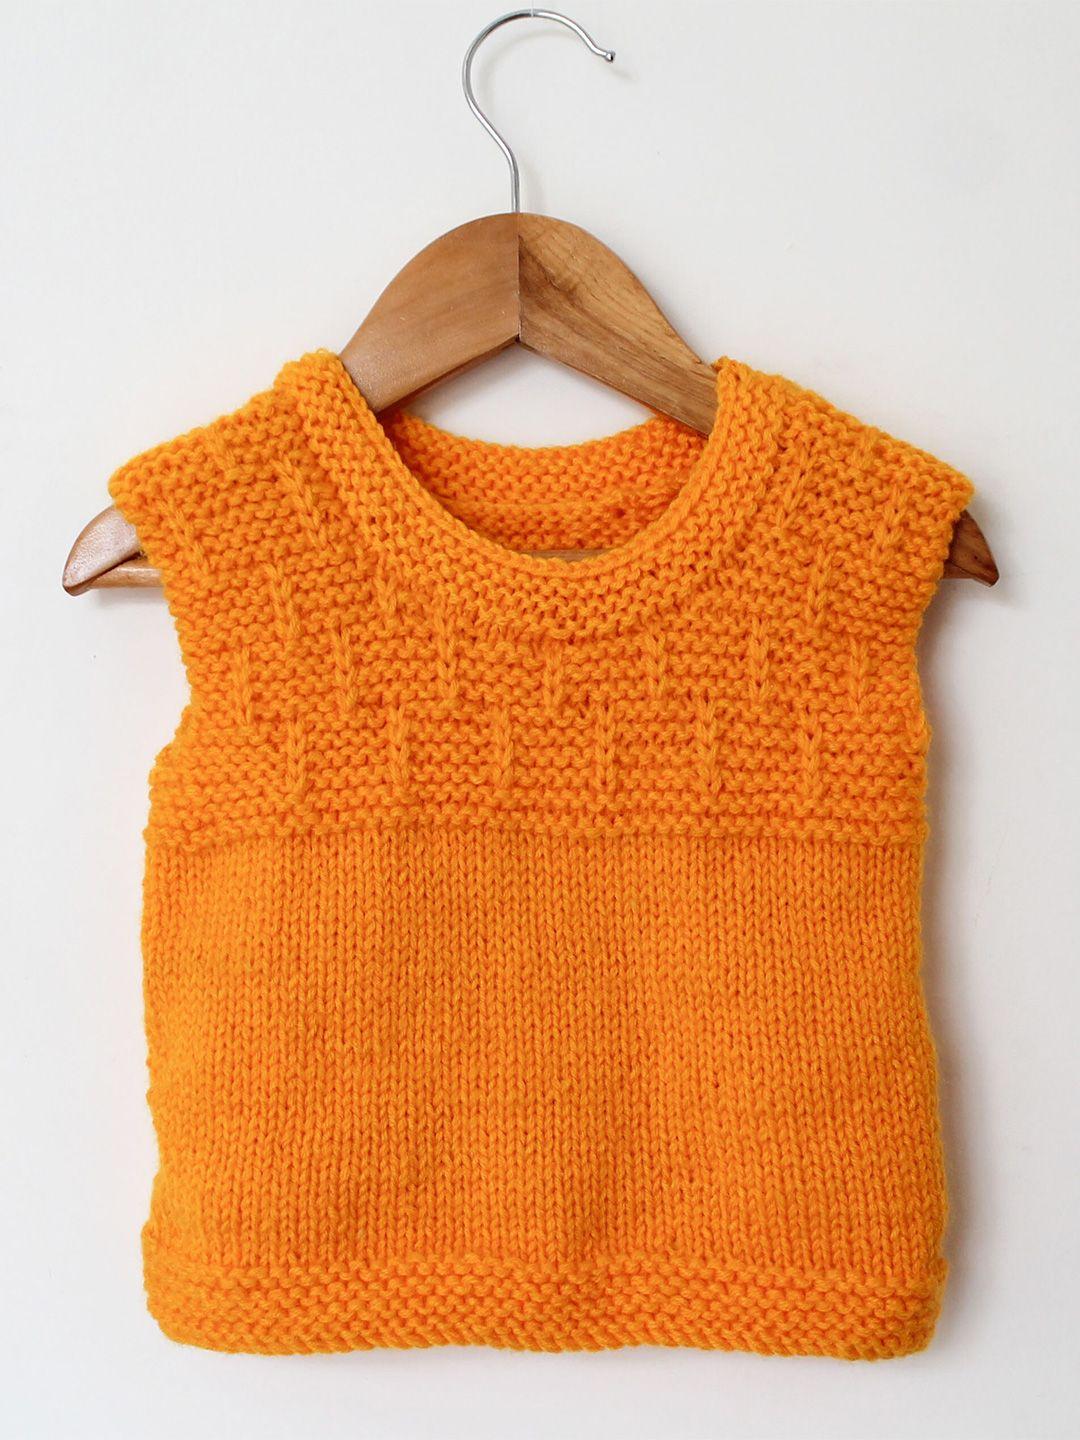 woonie unisex kids cable knit sweater acrylic vest